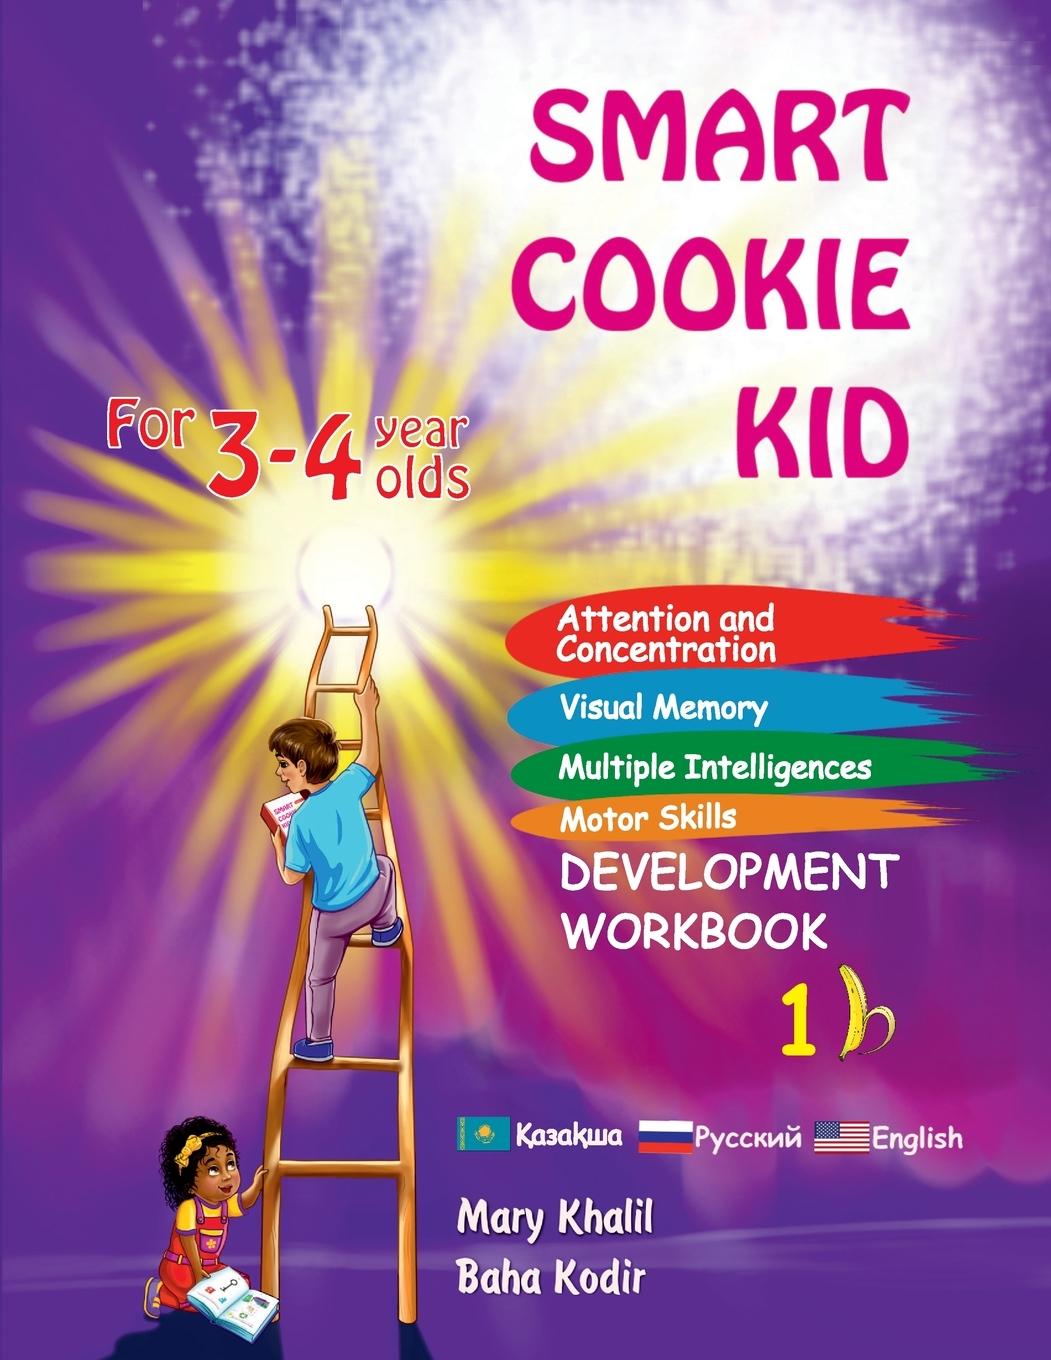 Book Smart Cookie Kid For 3-4 Year Olds Attention and Concentration Visual Memory Multiple Intelligences Motor Skills Book 1B Kazakh Russian English Baha Kodir